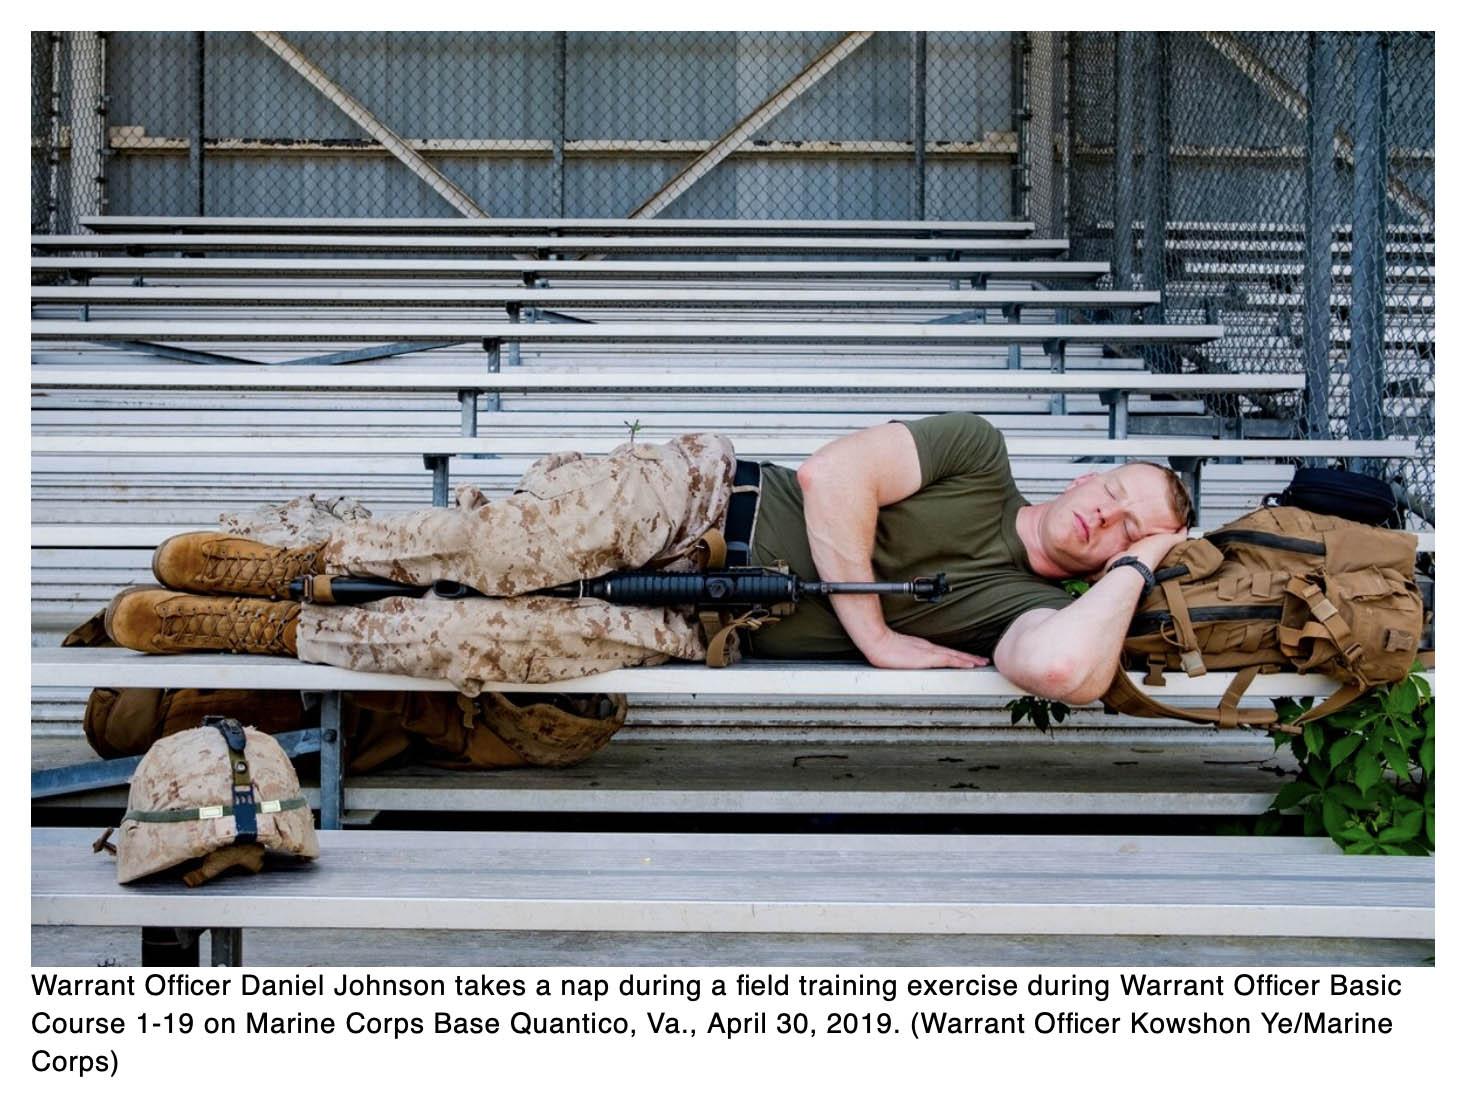  A definitive ranking of troopsâ€™ extreme napping positions